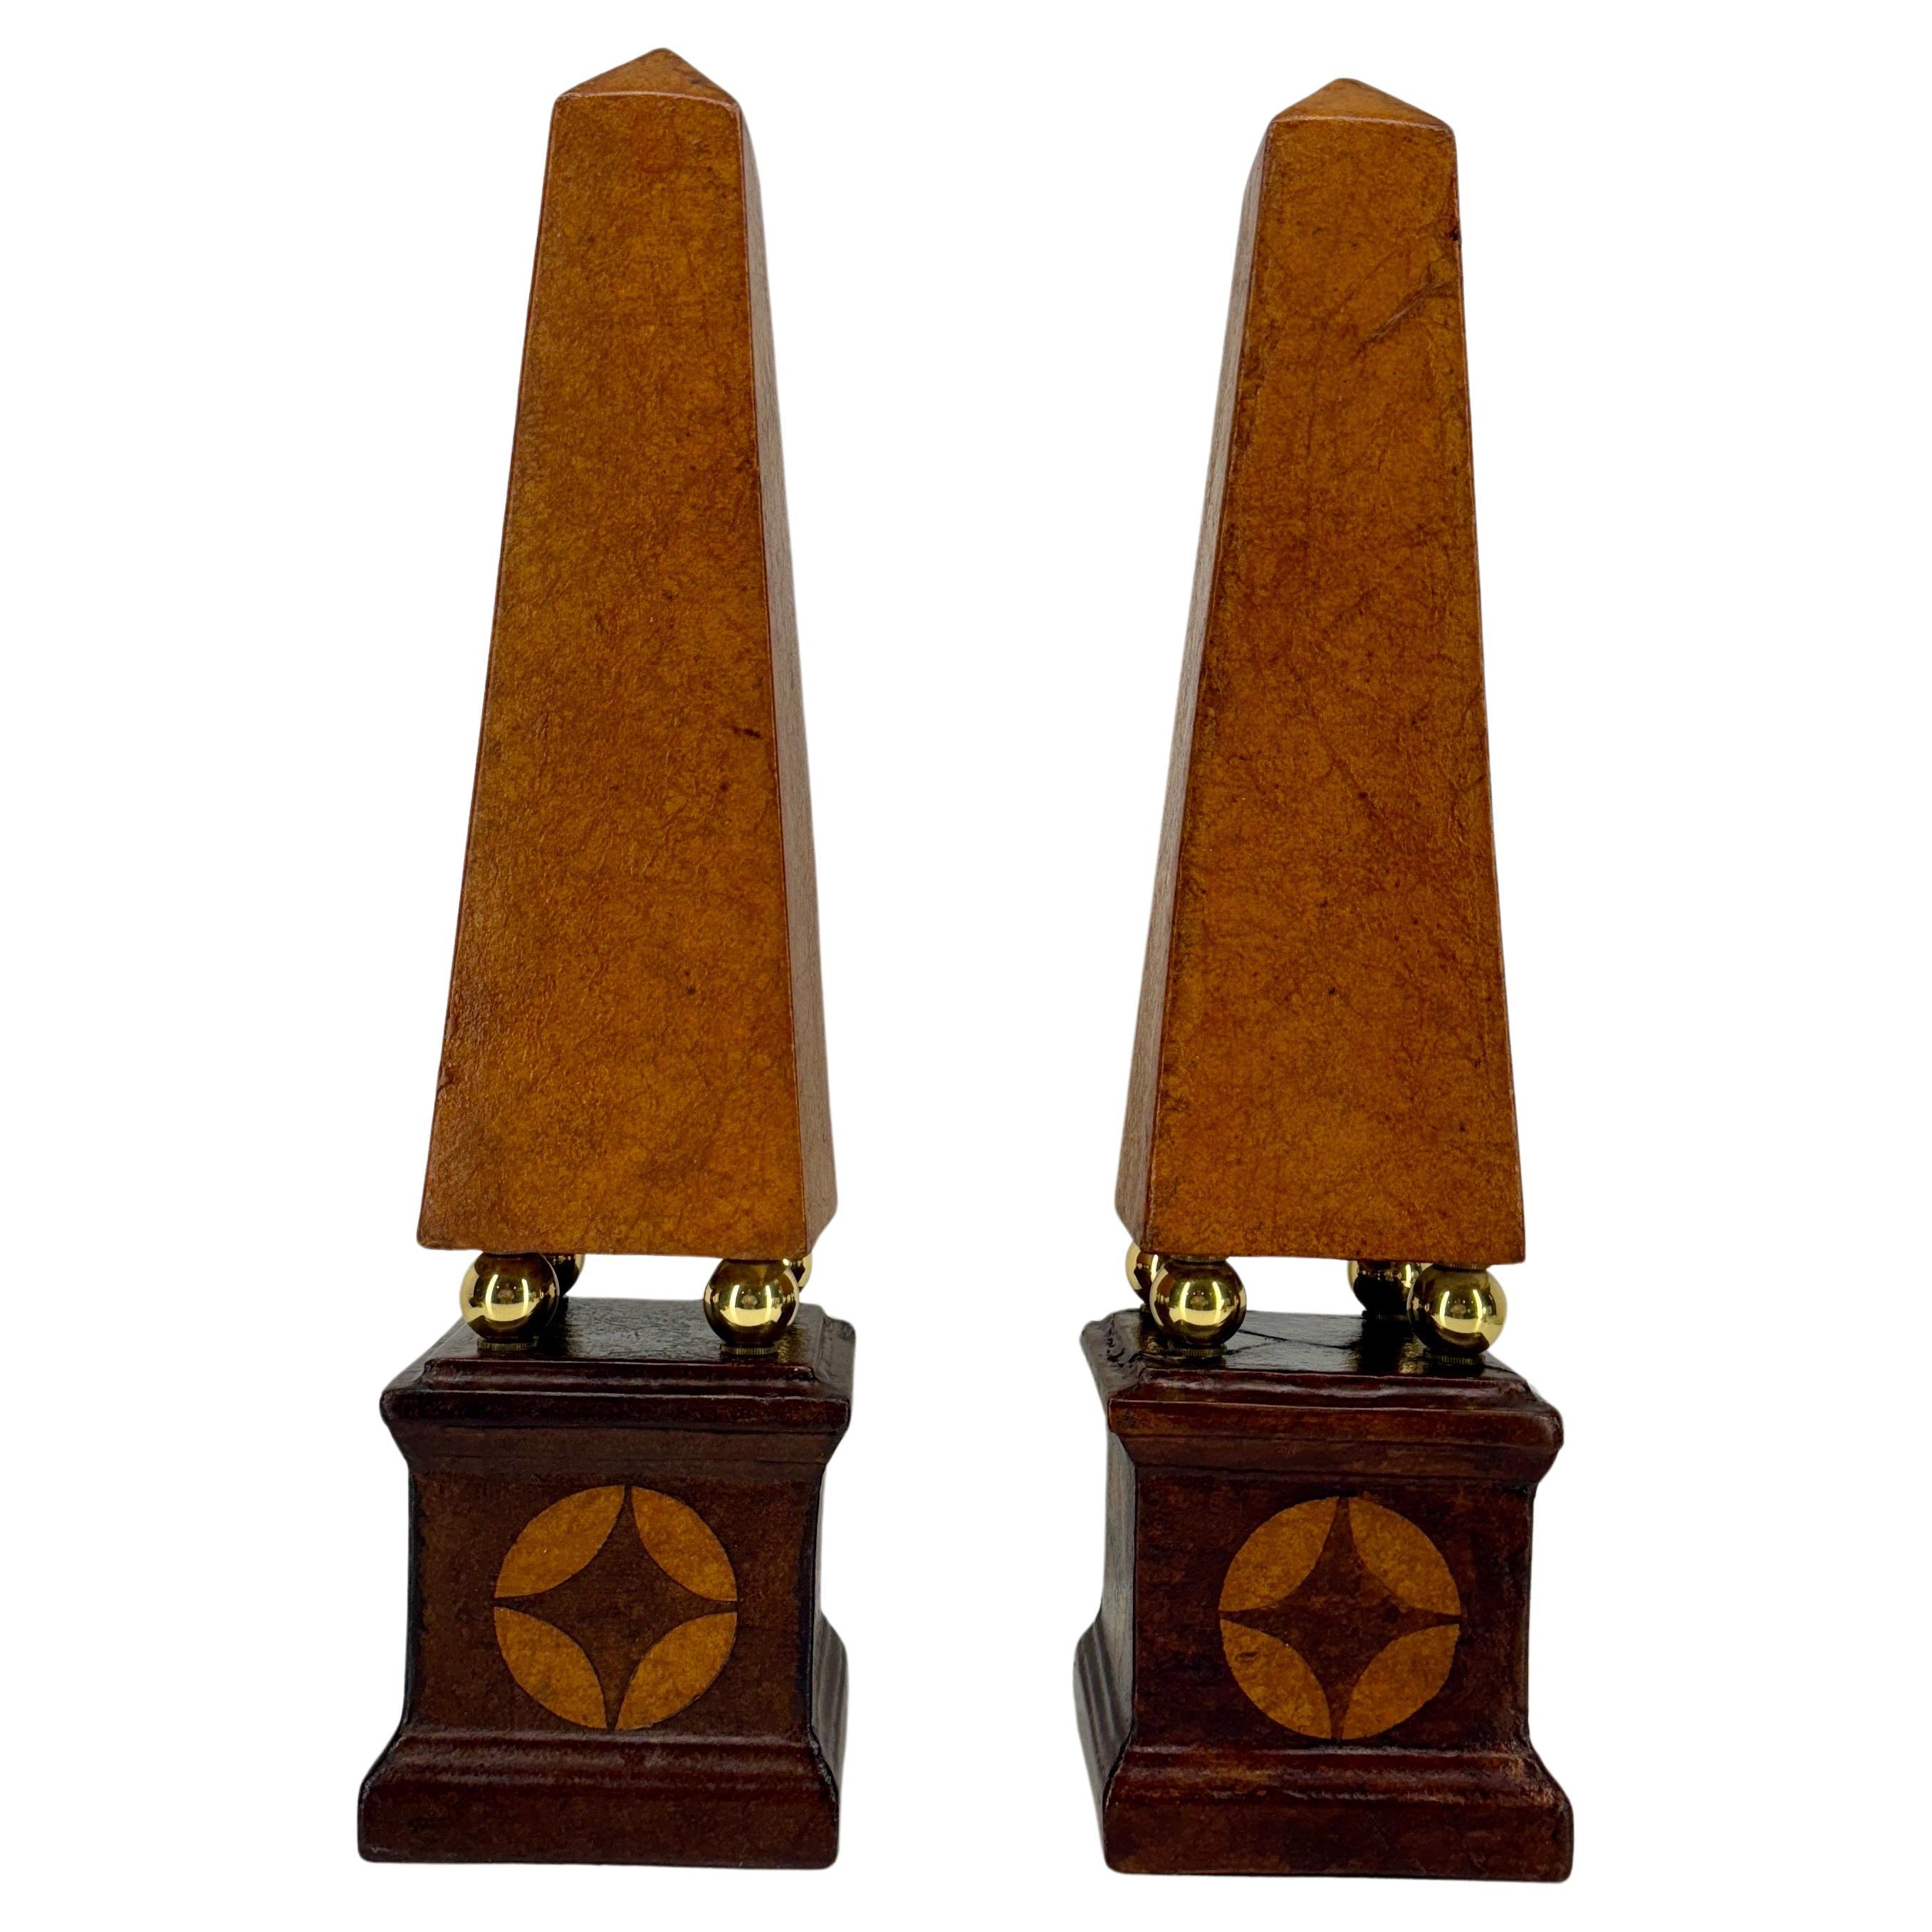 A fantastic pair of ceramic obelisks wrapped in leather from France. 
This delicate ceramic pair are beautifully embossed in classic brown leather with brass balls as detail. This classic set, each standing 21.75